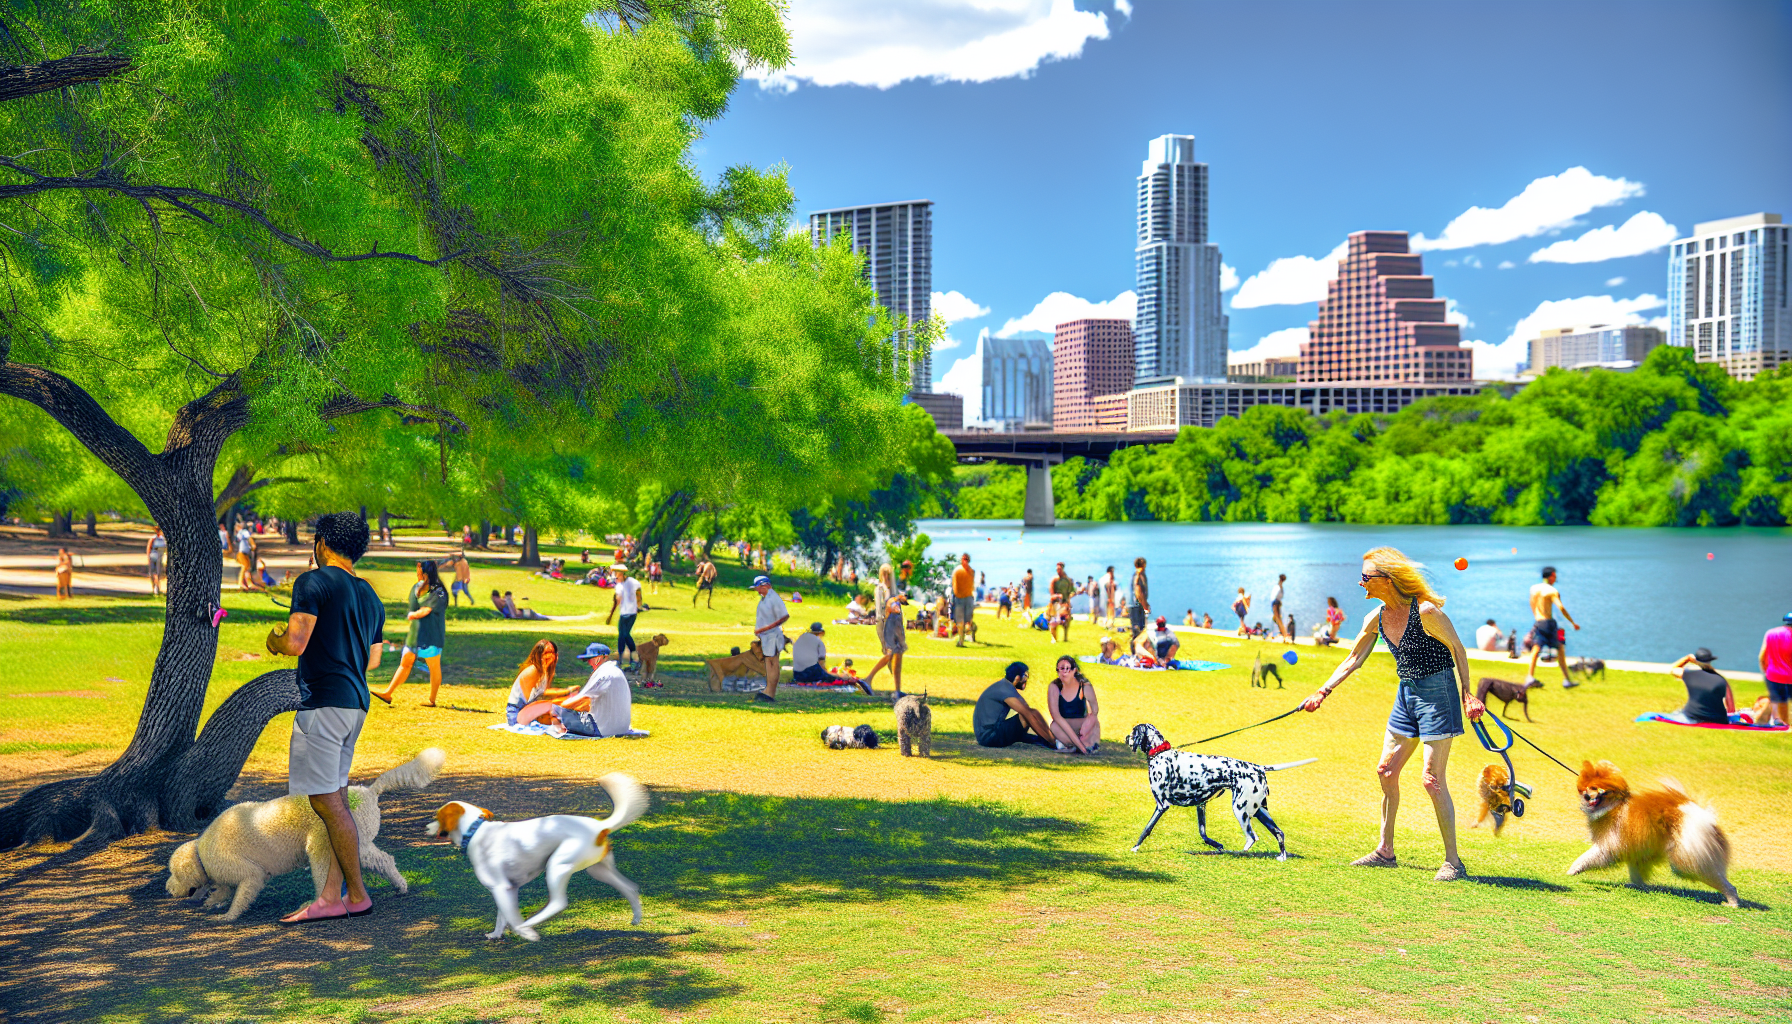 Lively atmosphere at Auditorium Shores with pets and owners enjoying outdoor activities